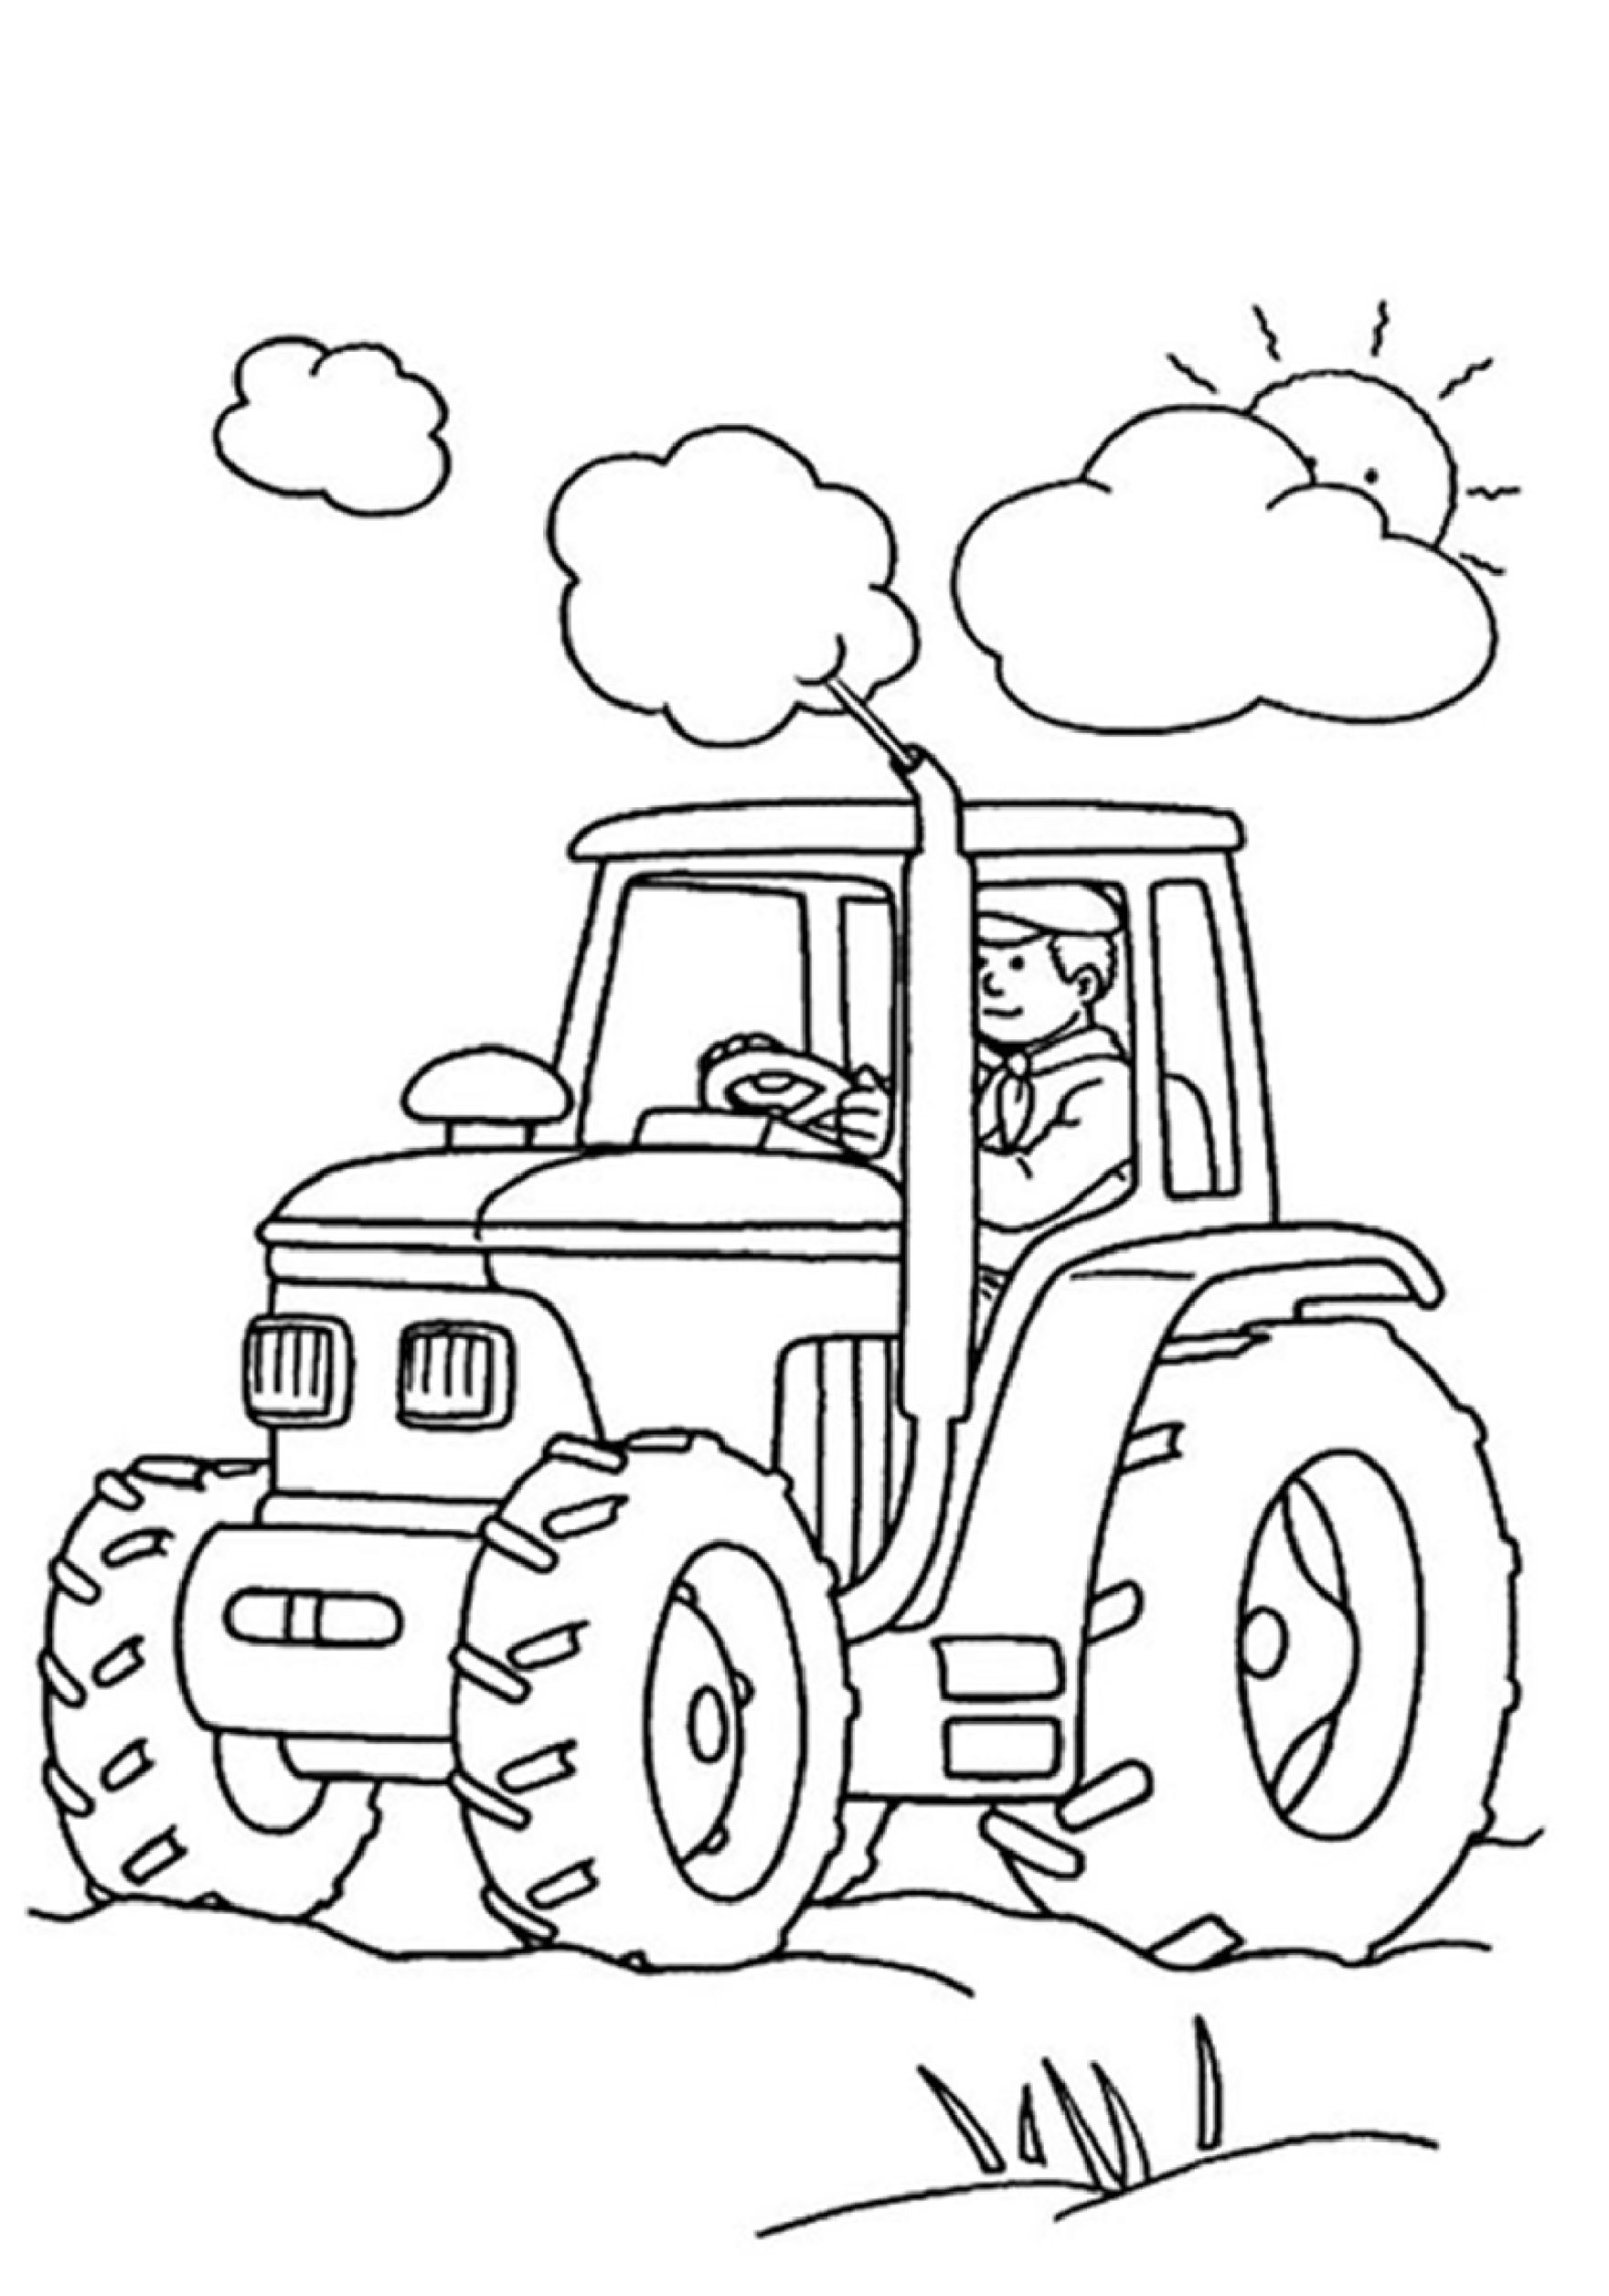 Coloring Pages For Kids Pdf
 Knowledge Free Printable Coloring Pages For Kids Resume